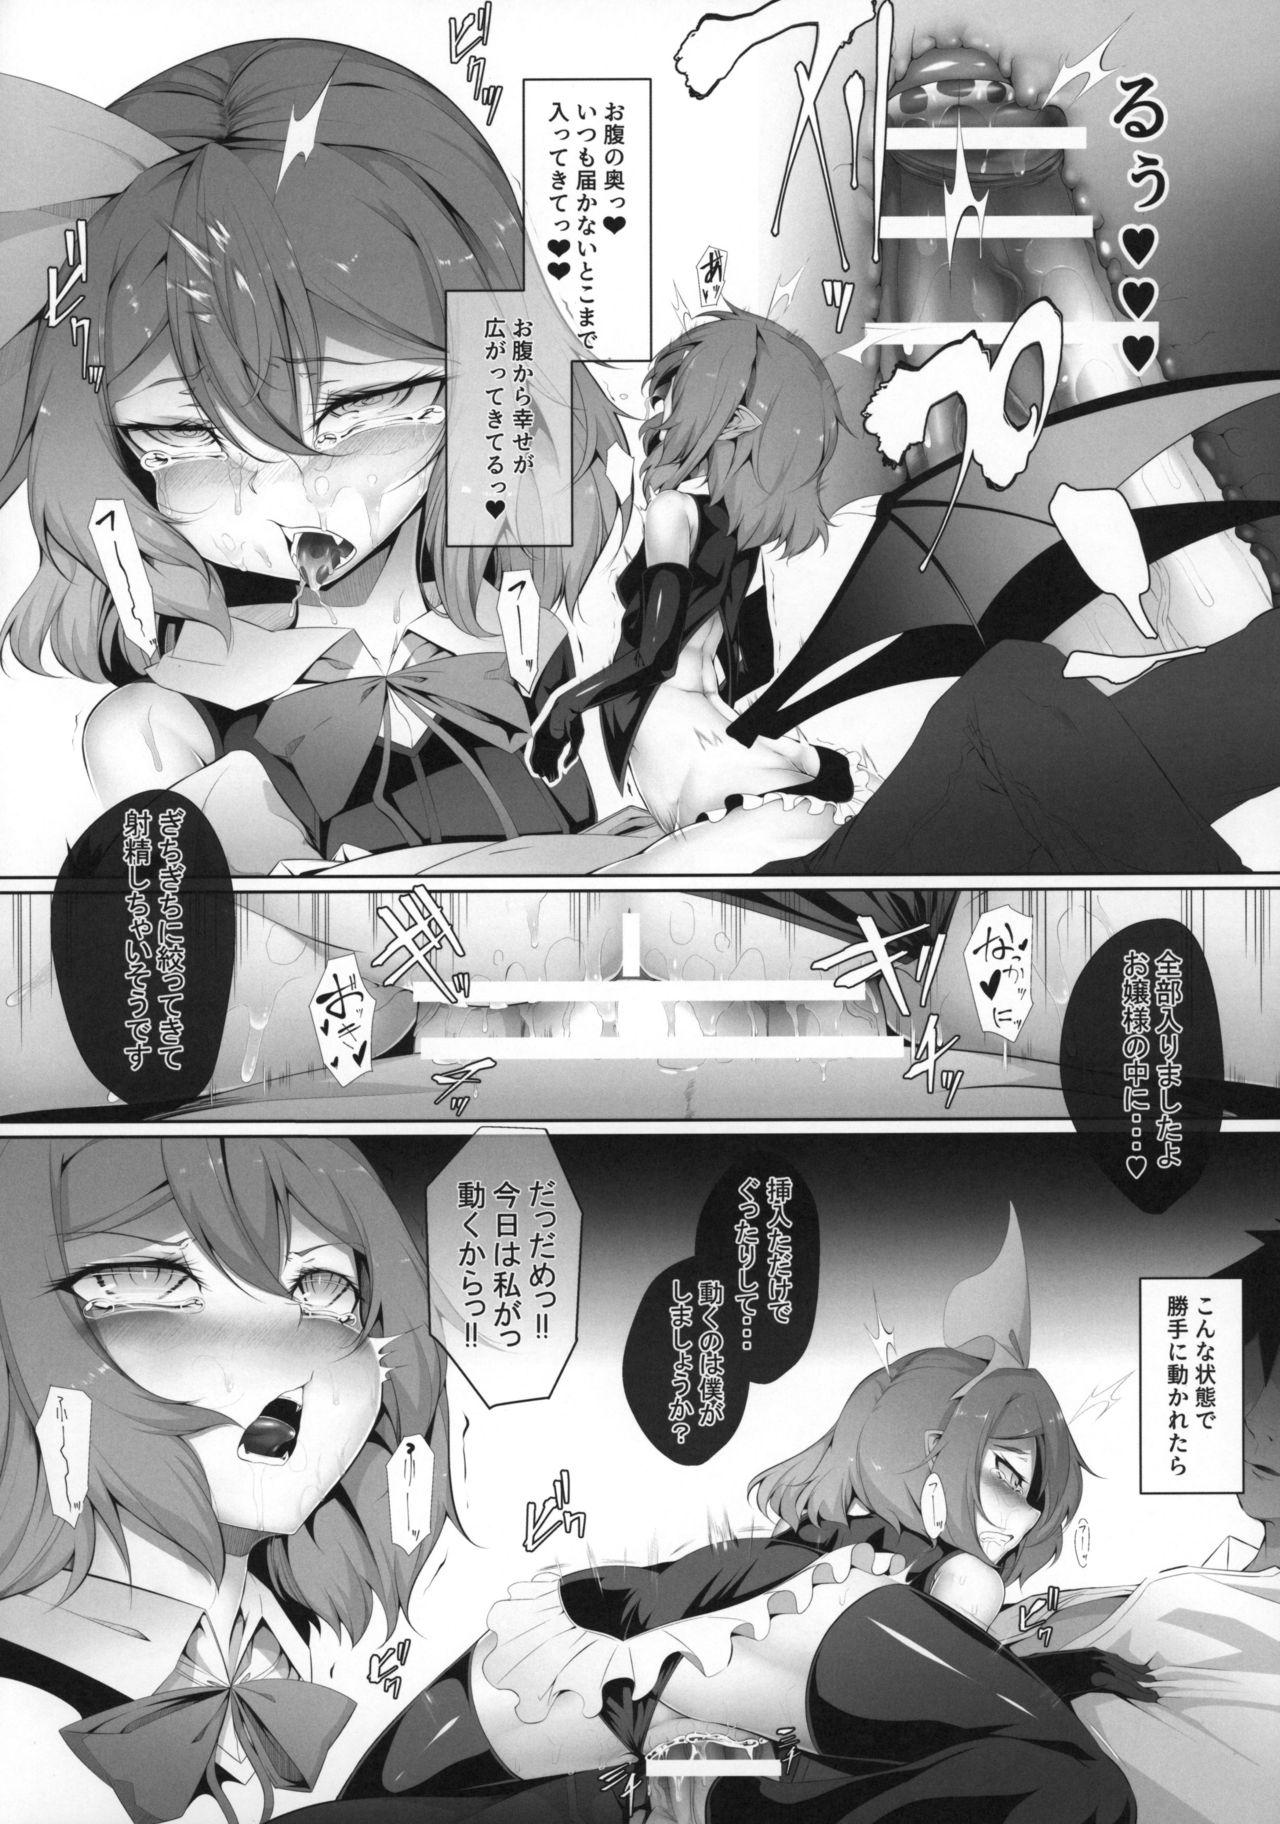 Slutty M.P. vol. 19 - Touhou project Lover - Page 10